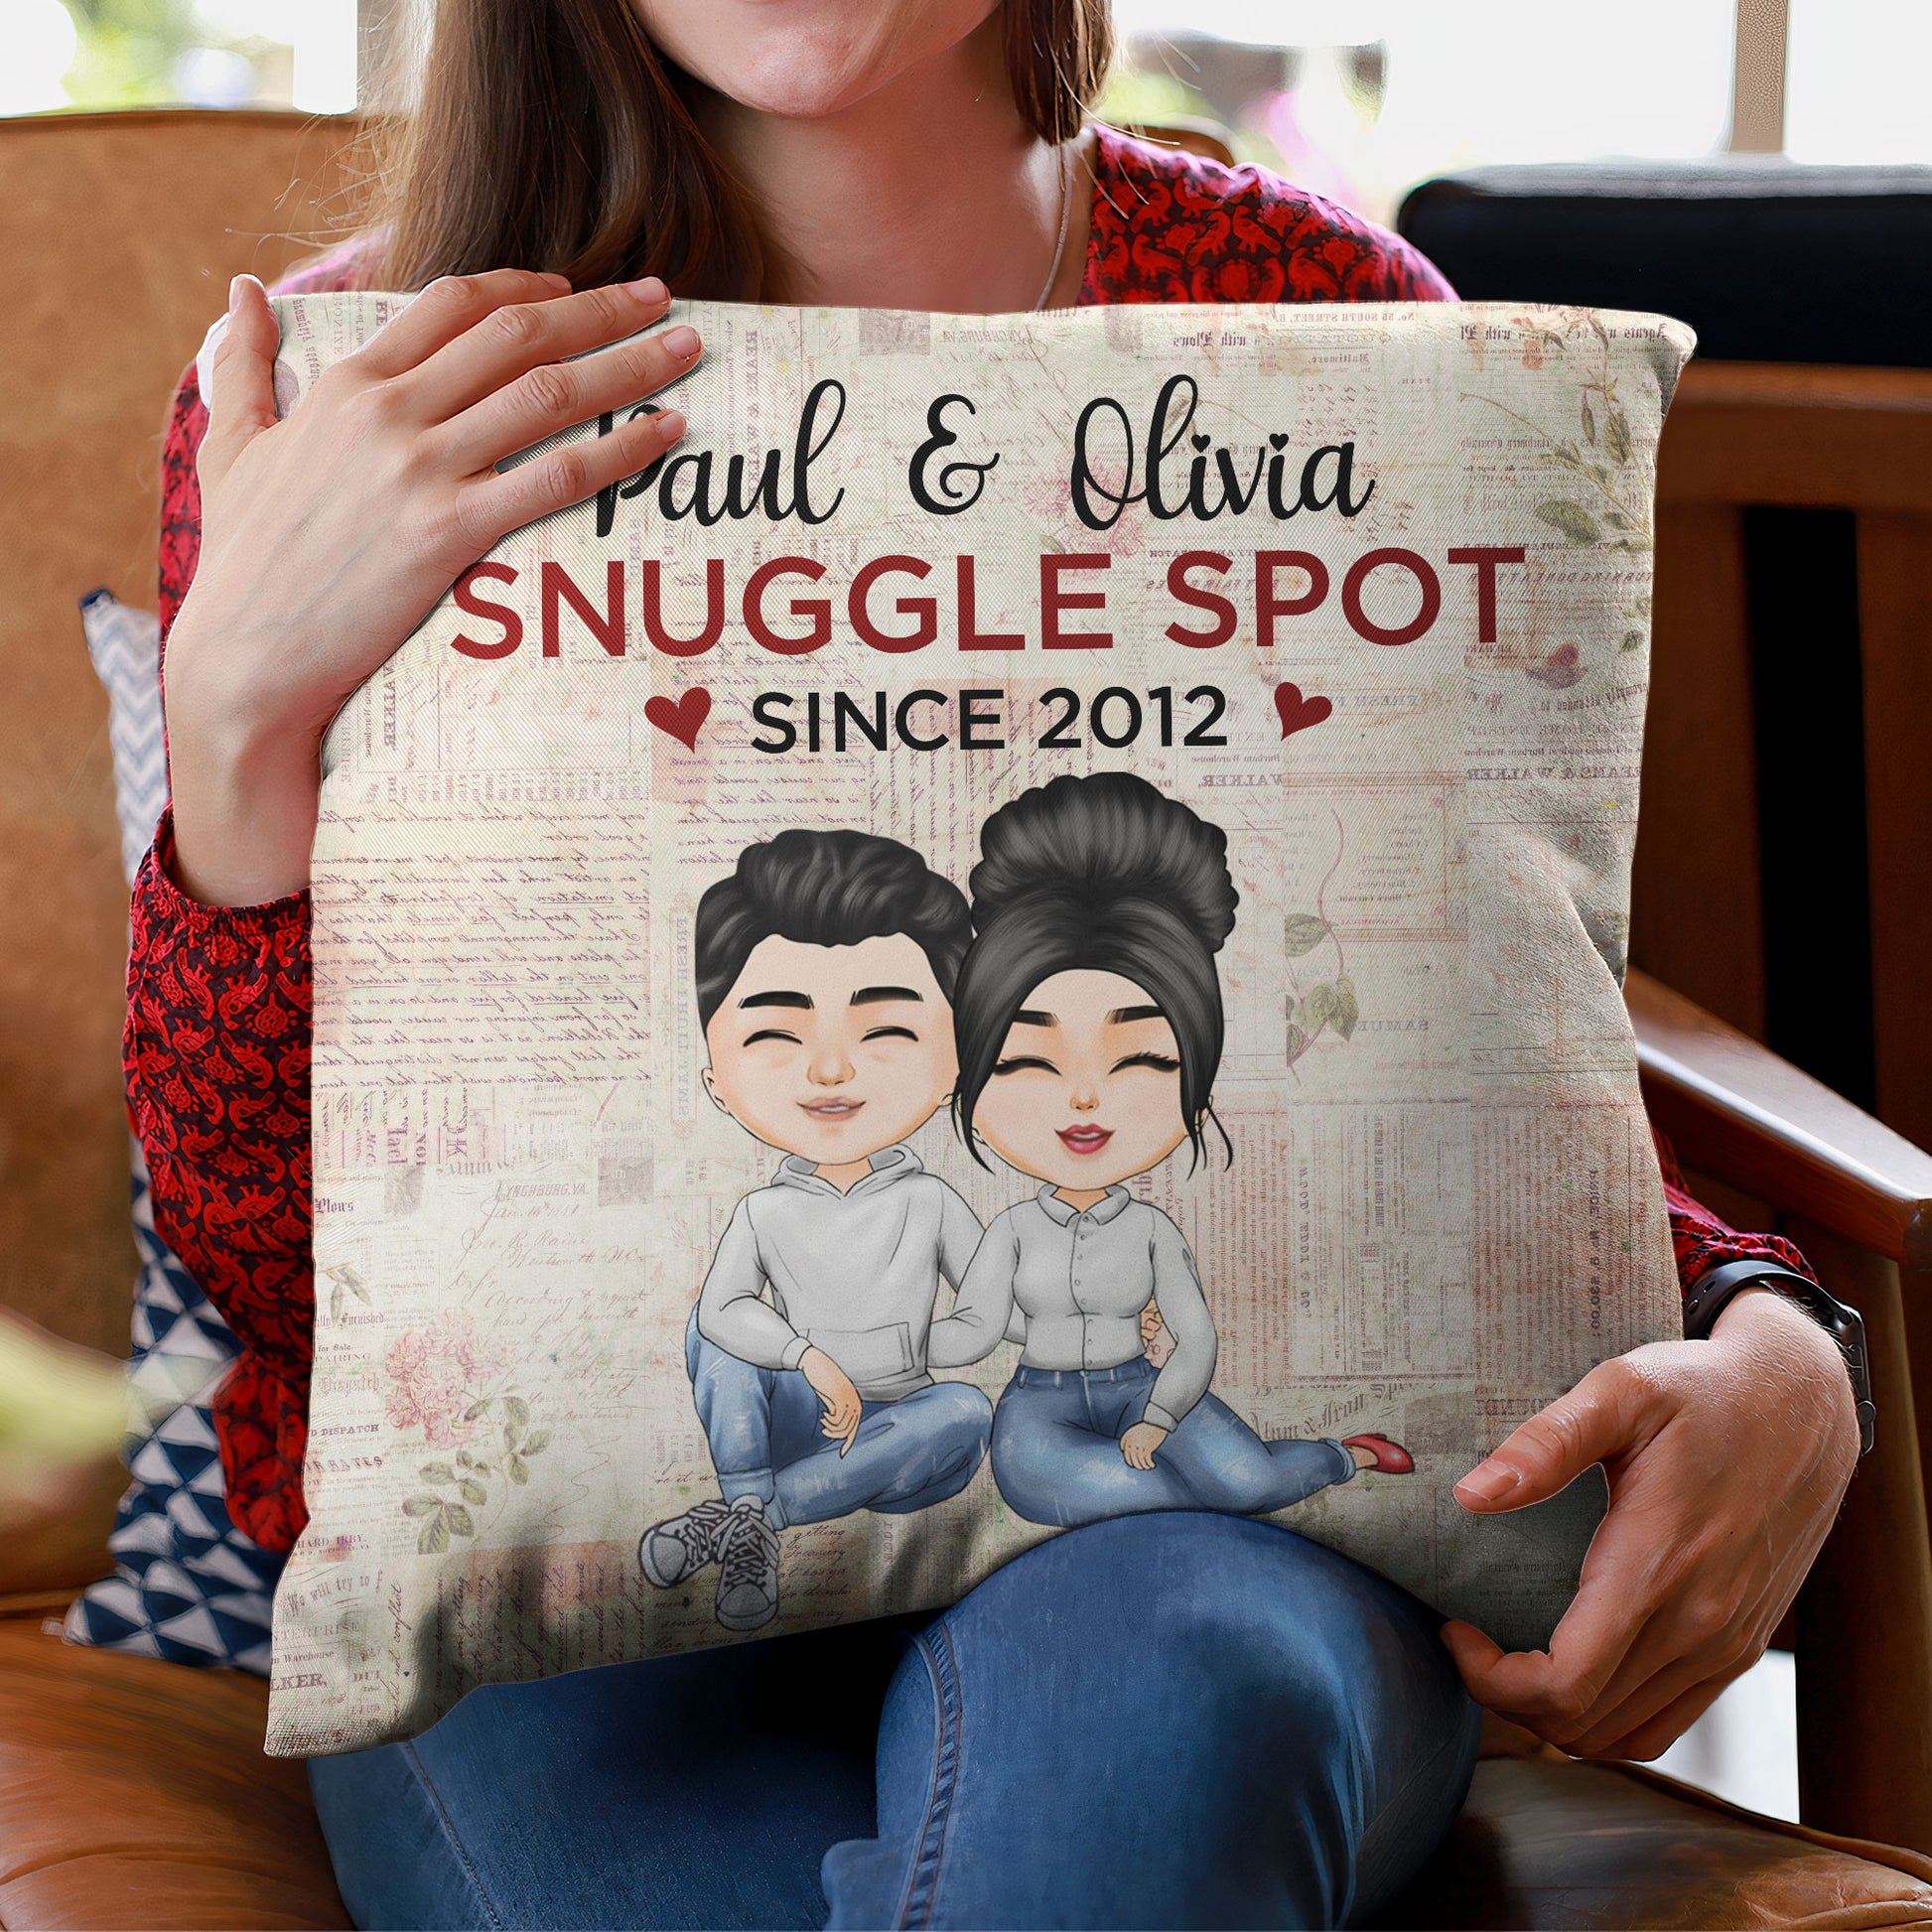 Our Snuggle Spot Since - Personalized Pillow - Anniversary, Valentine's Day Gift For Husband, Wife, Partner, Couple